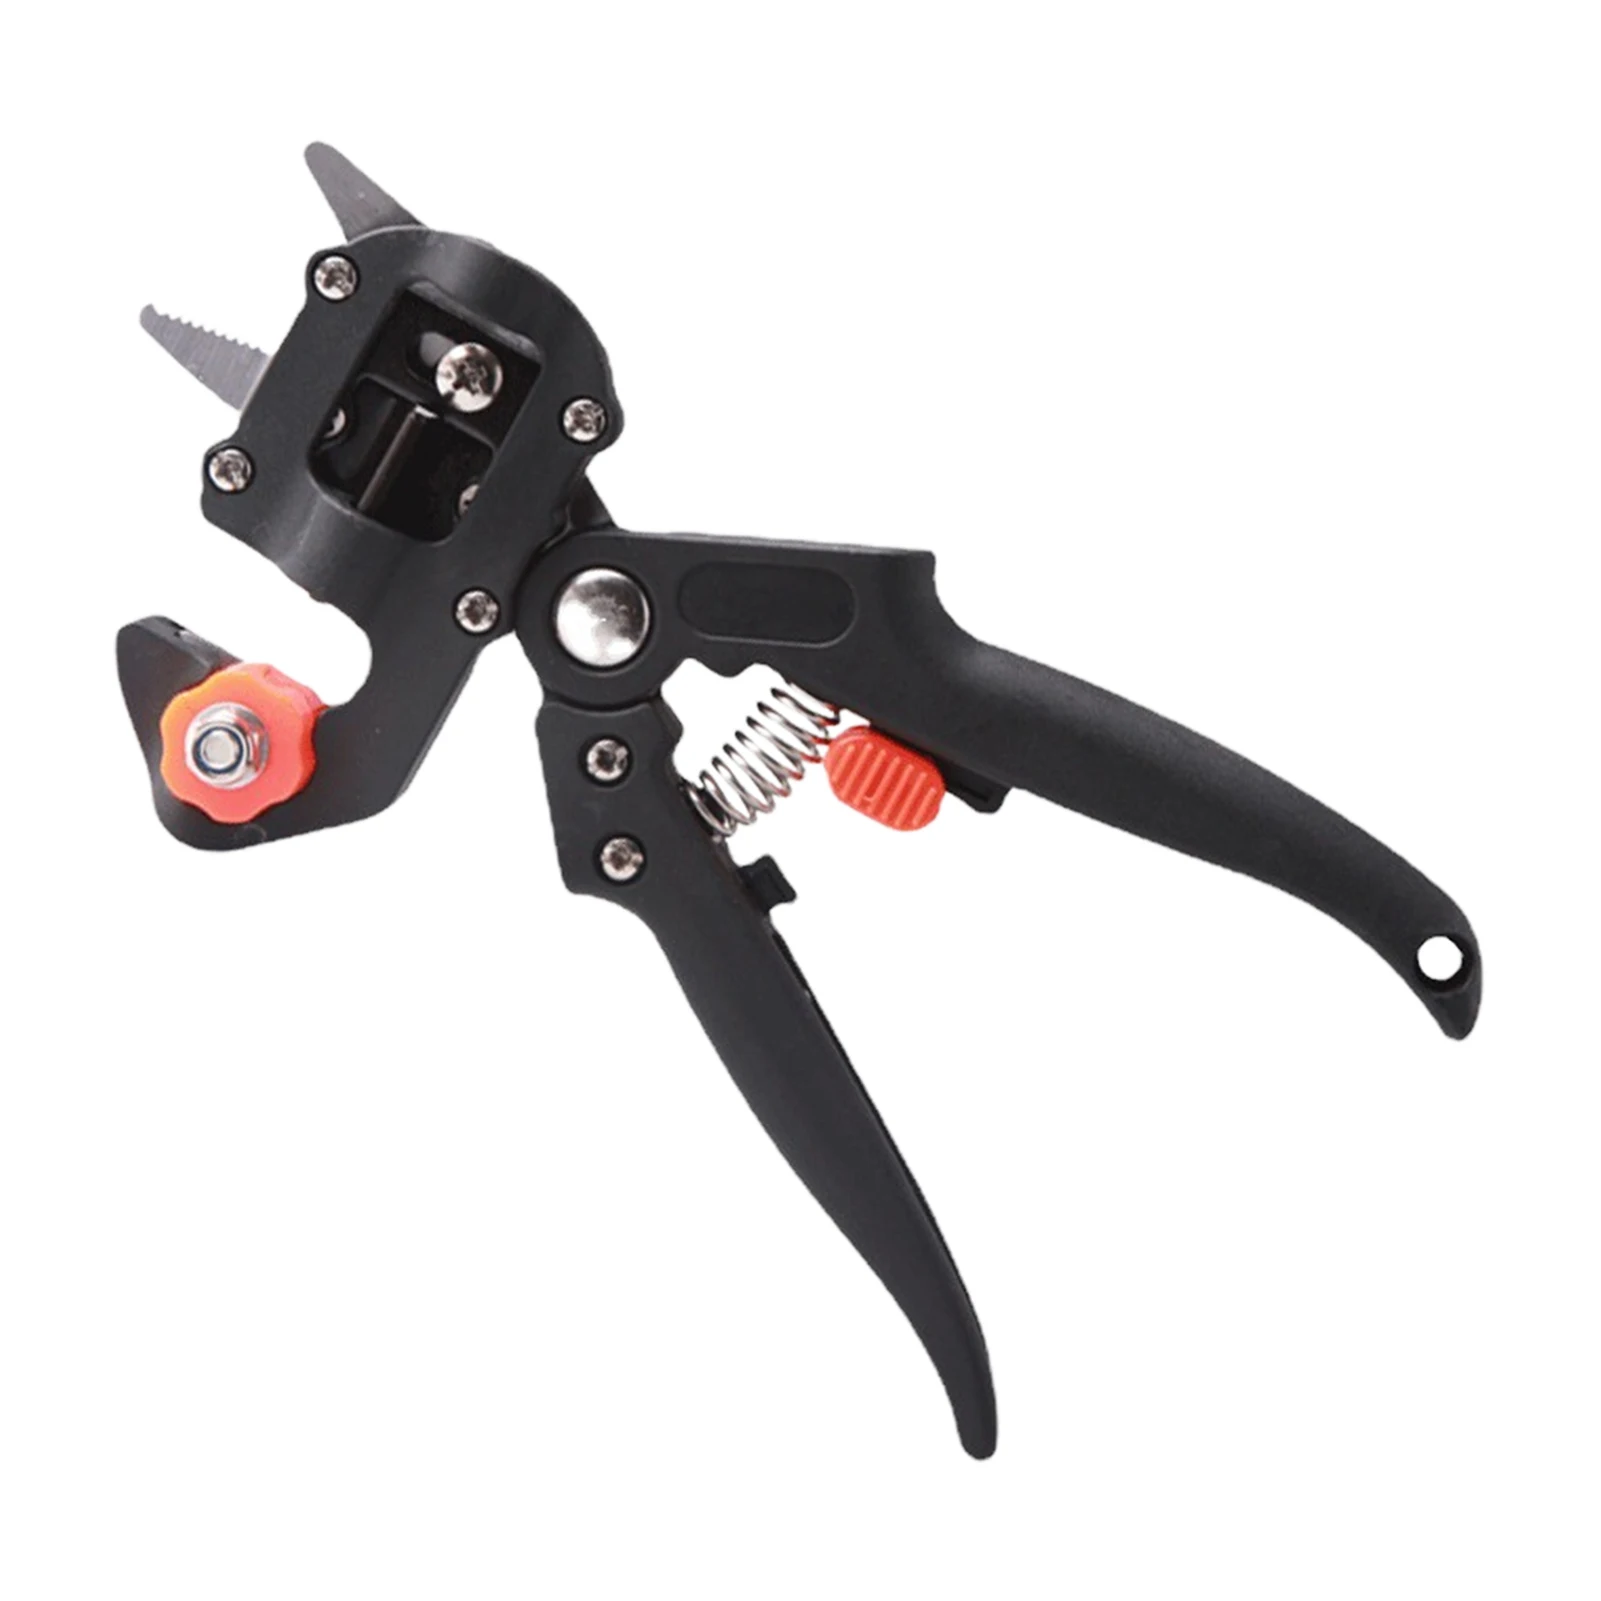 

Bypass Pruning Shears Grafting Tools Pruner Kit Perfect For Fruit Tree Grafting Pruning Scissors Including Replacement Blades